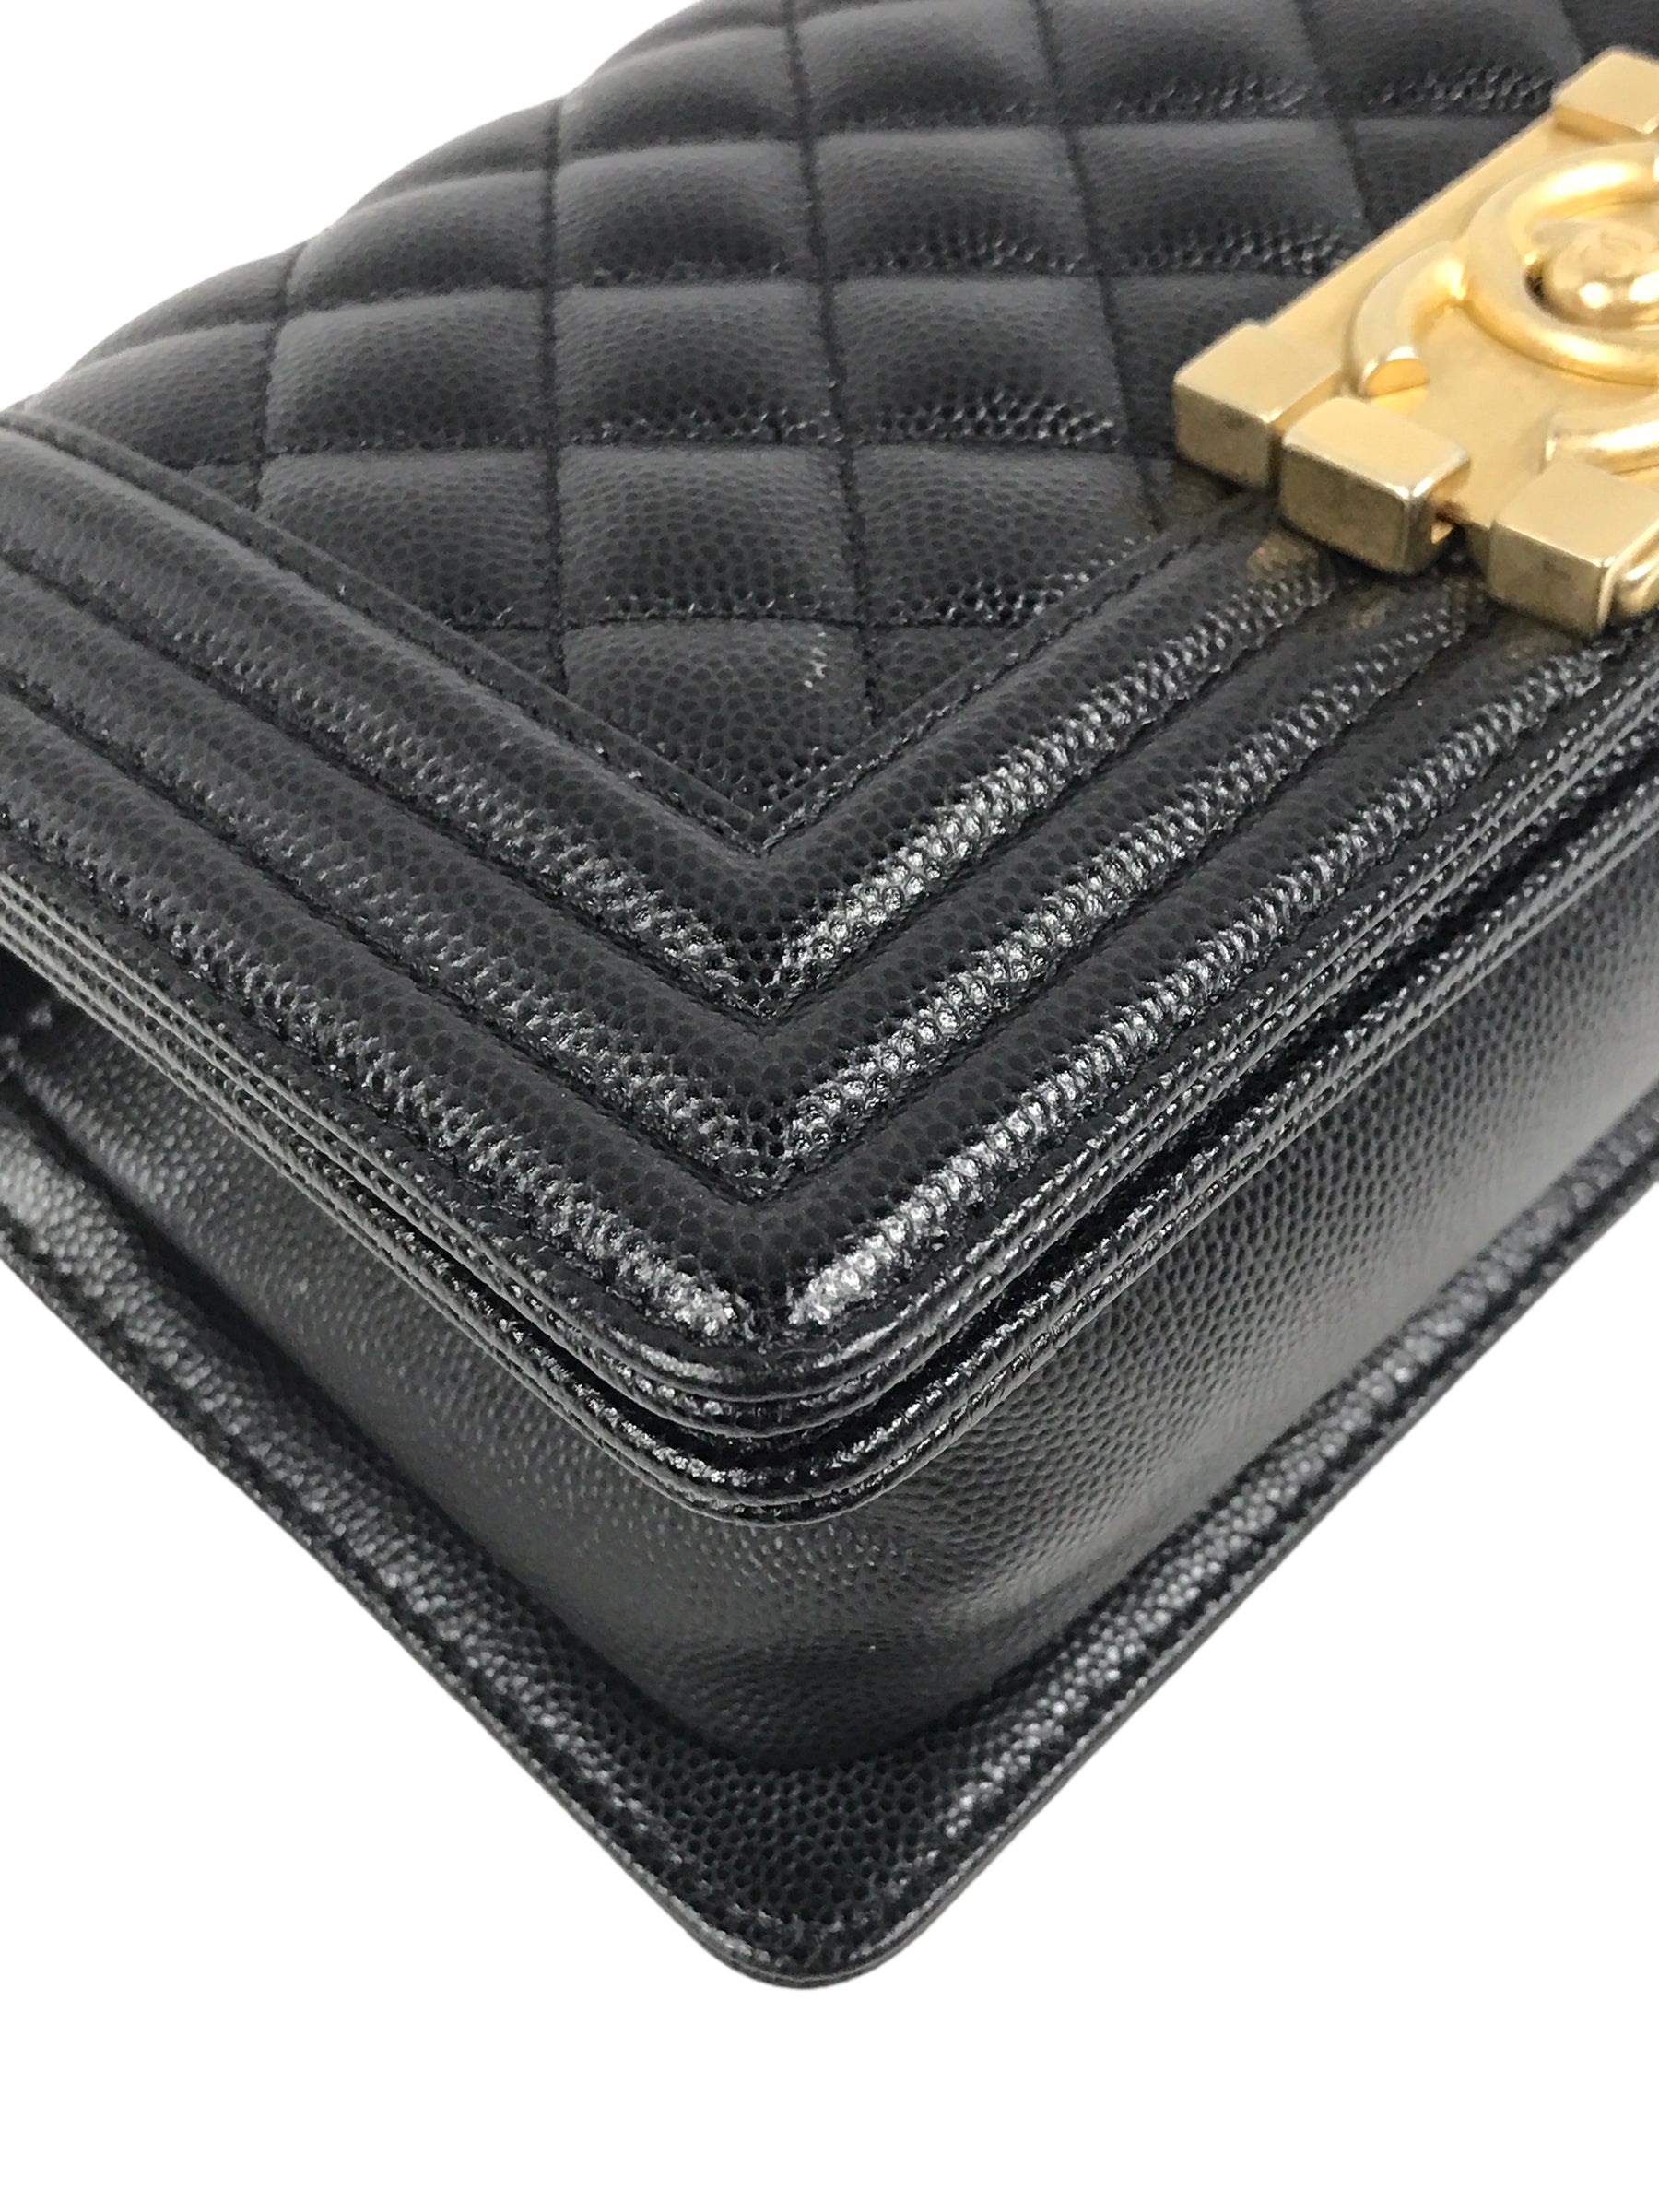 Black Caviar Small Quilted Boy Bag w/AGHW